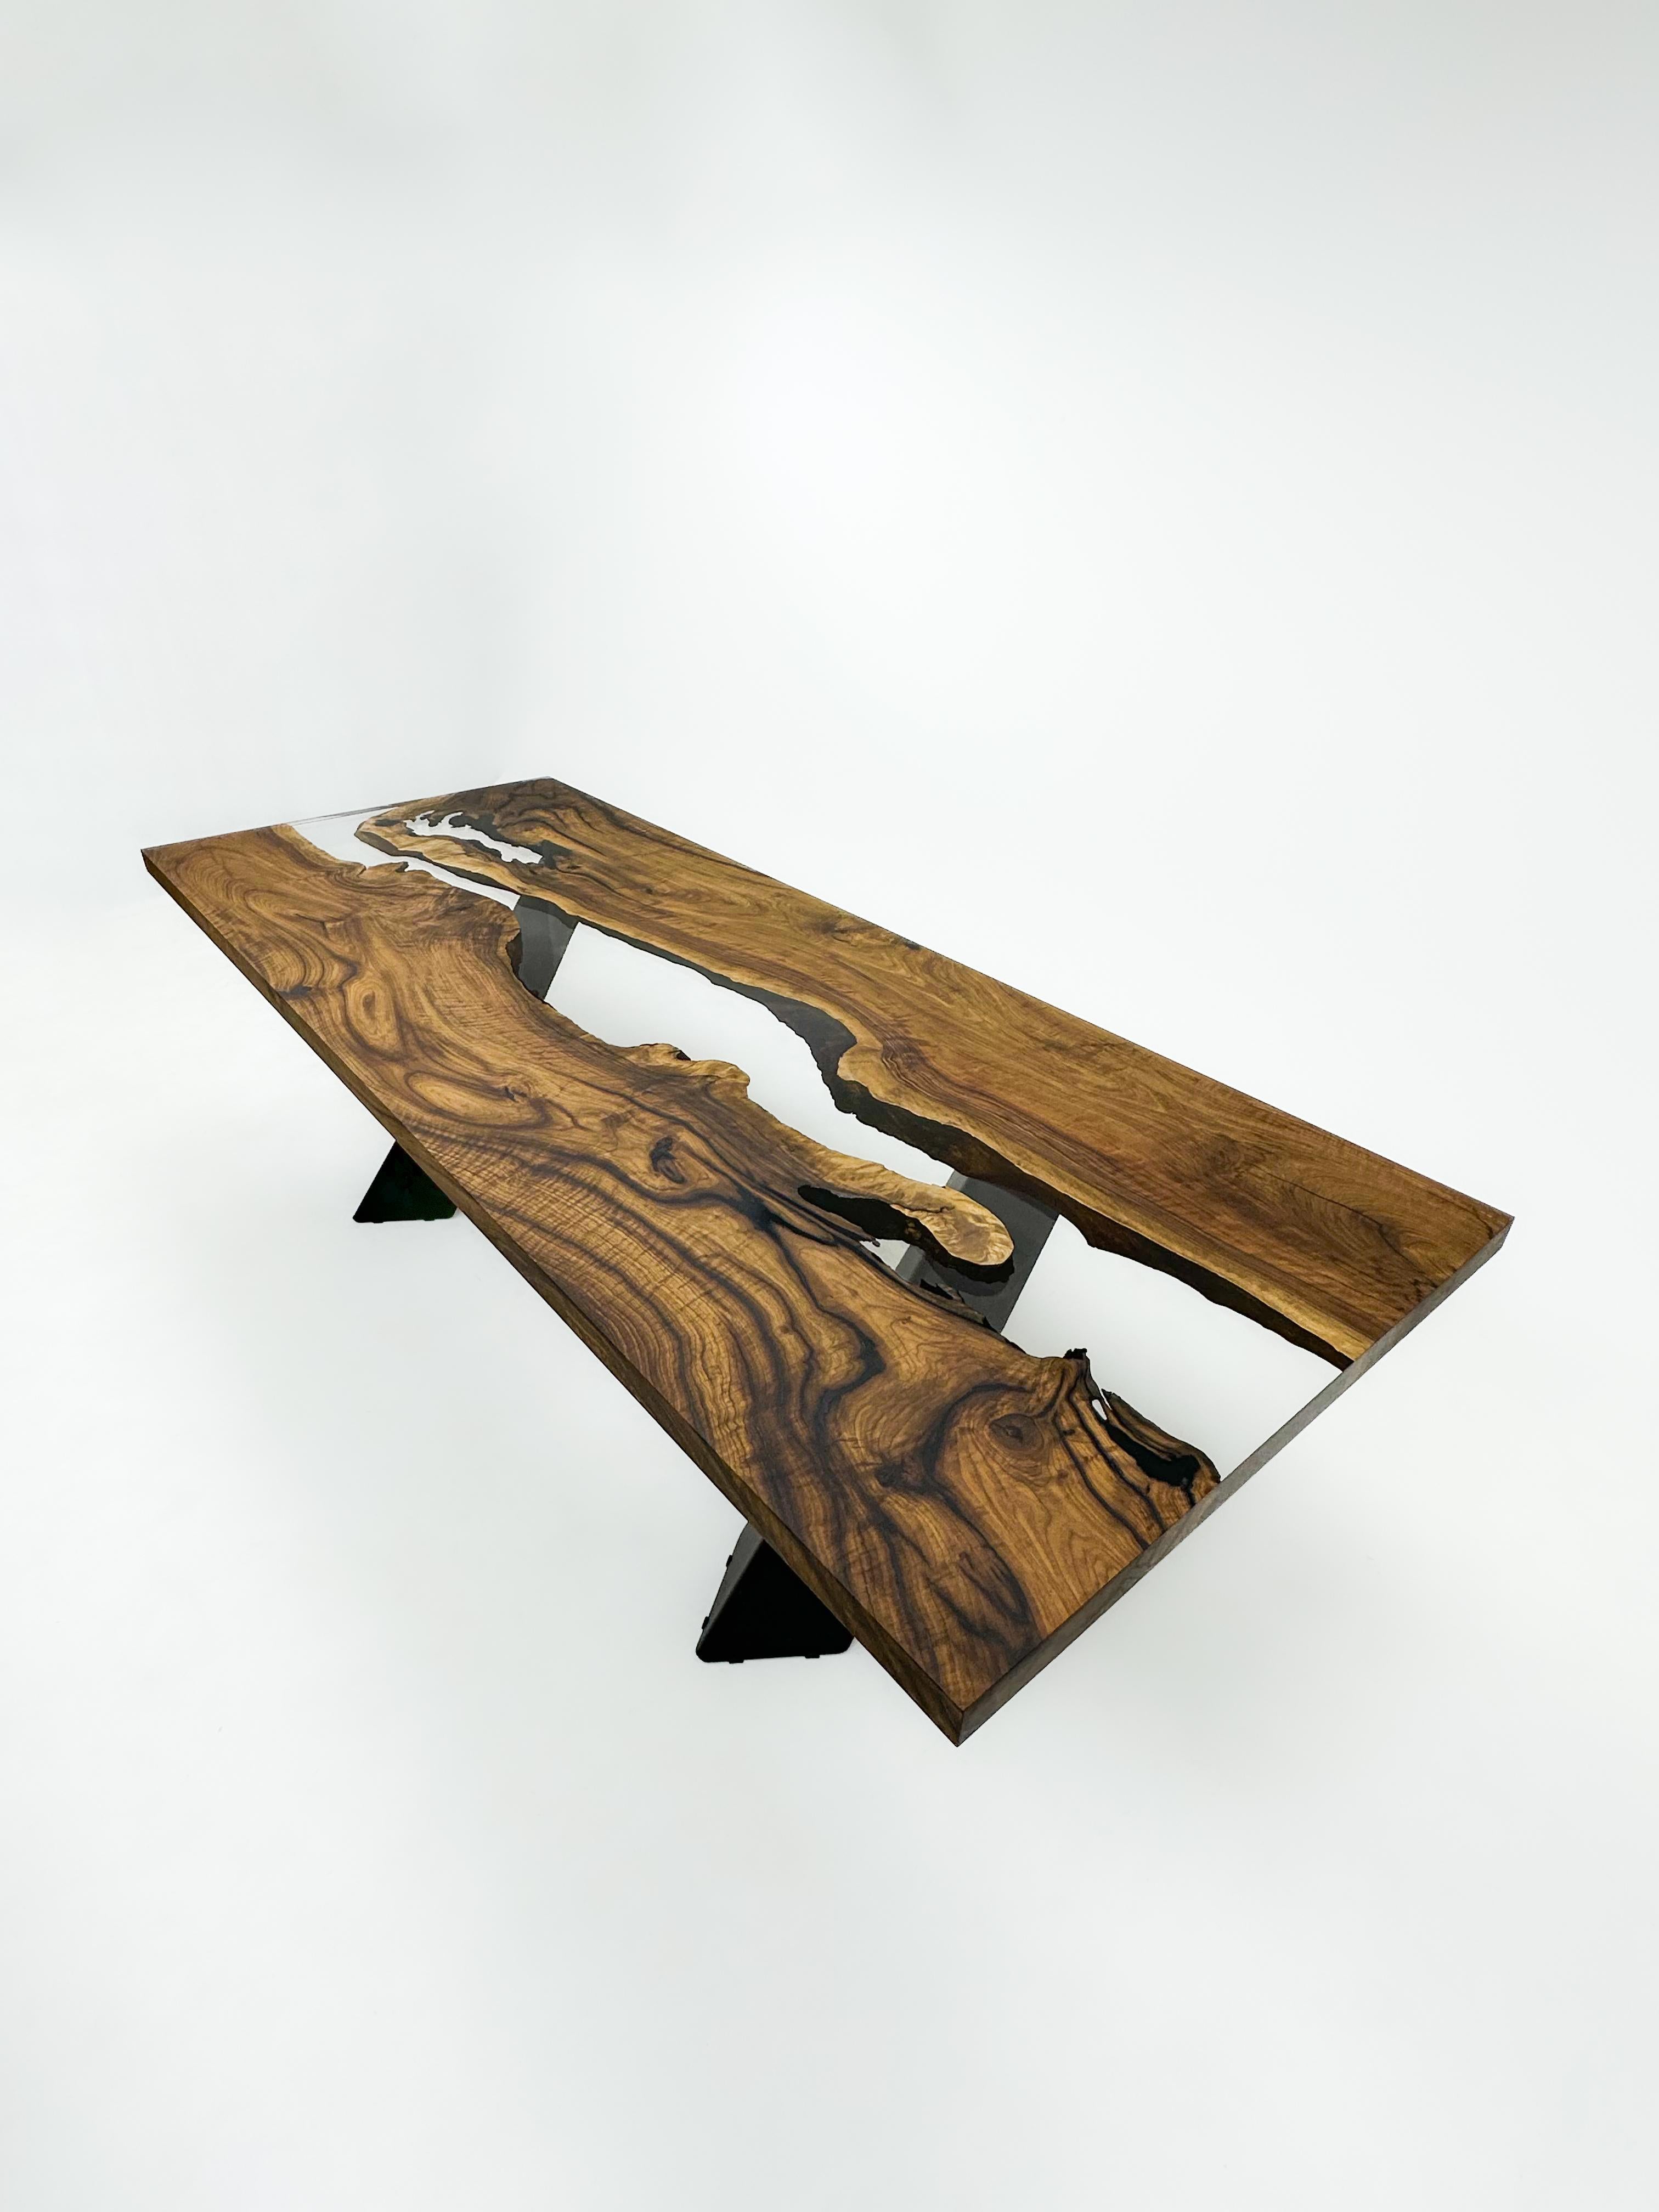 Custom Epoxy Resin Dining Table 

This table is made of 500 years old Walnut Wood. The grains and texture of the wood describe what a natural walnut woods looks like.
It can be used as a dining table or as a conference table. Suitable for indoor